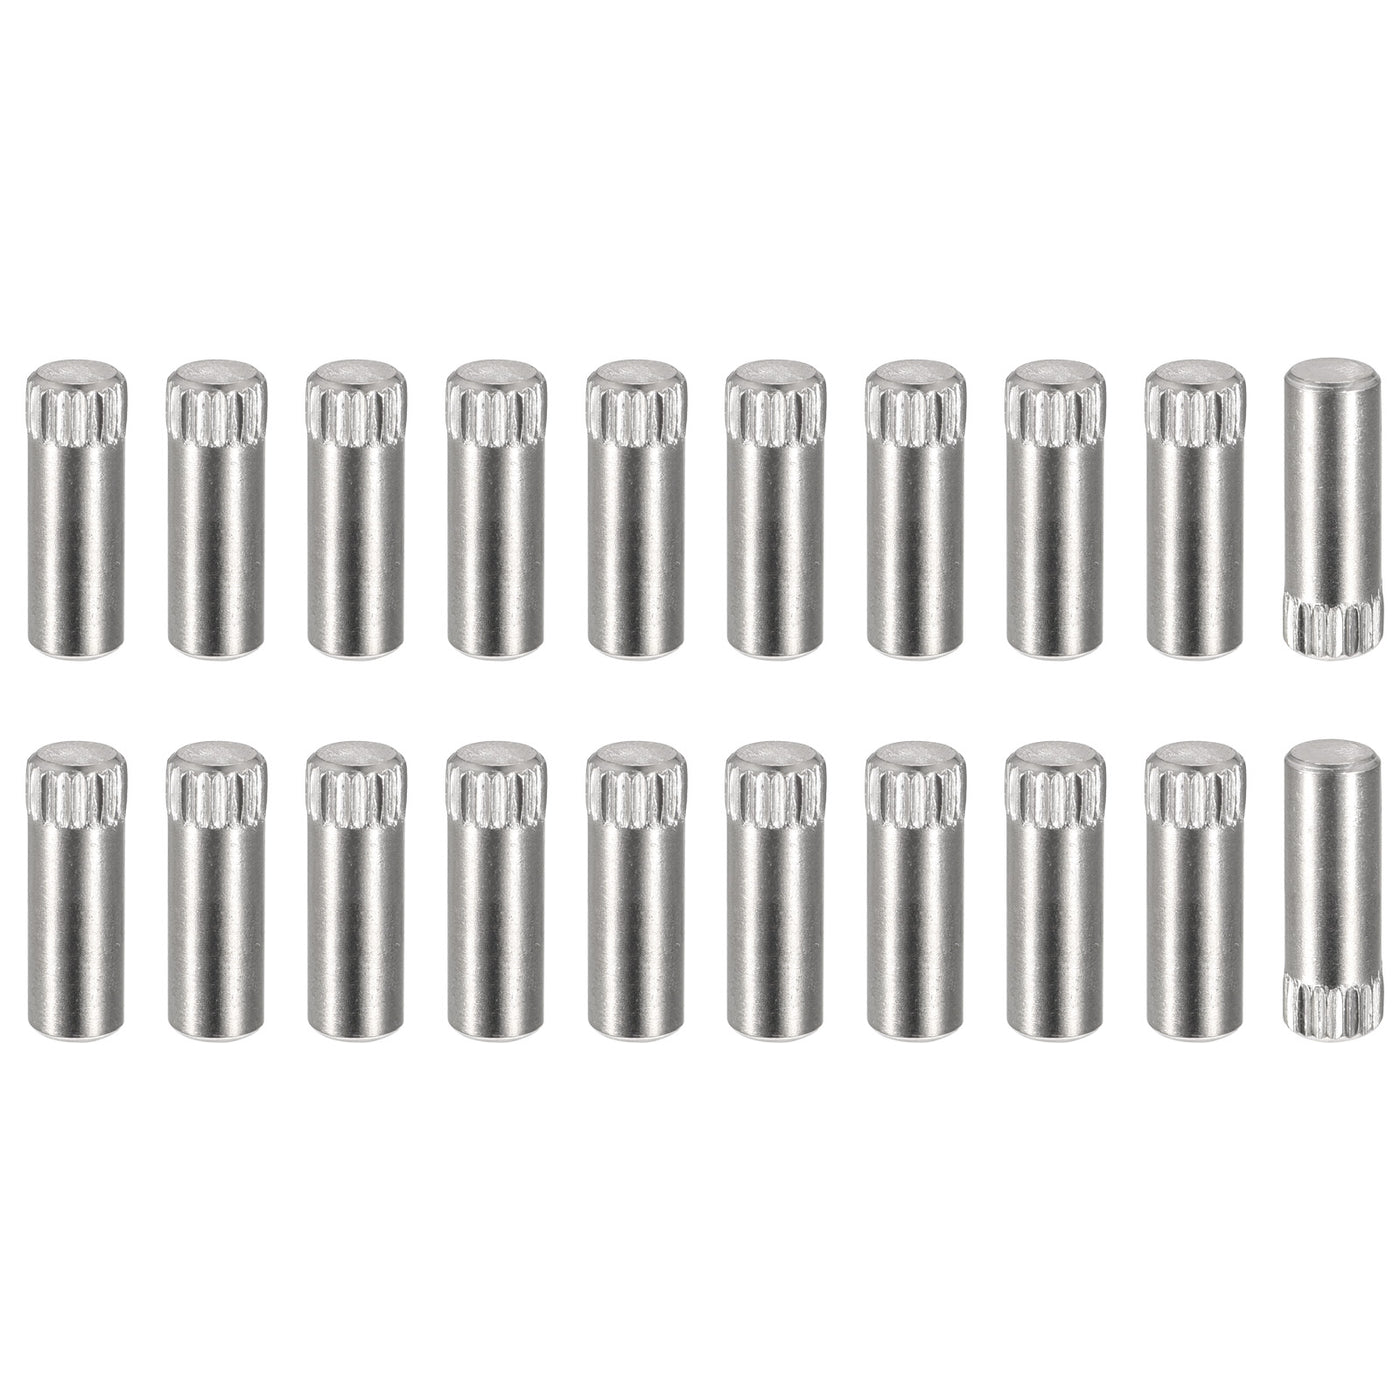 uxcell Uxcell 5x14mm 304 Stainless Steel Dowel Pins, 20Pcs Knurled Head Flat End Dowel Pin